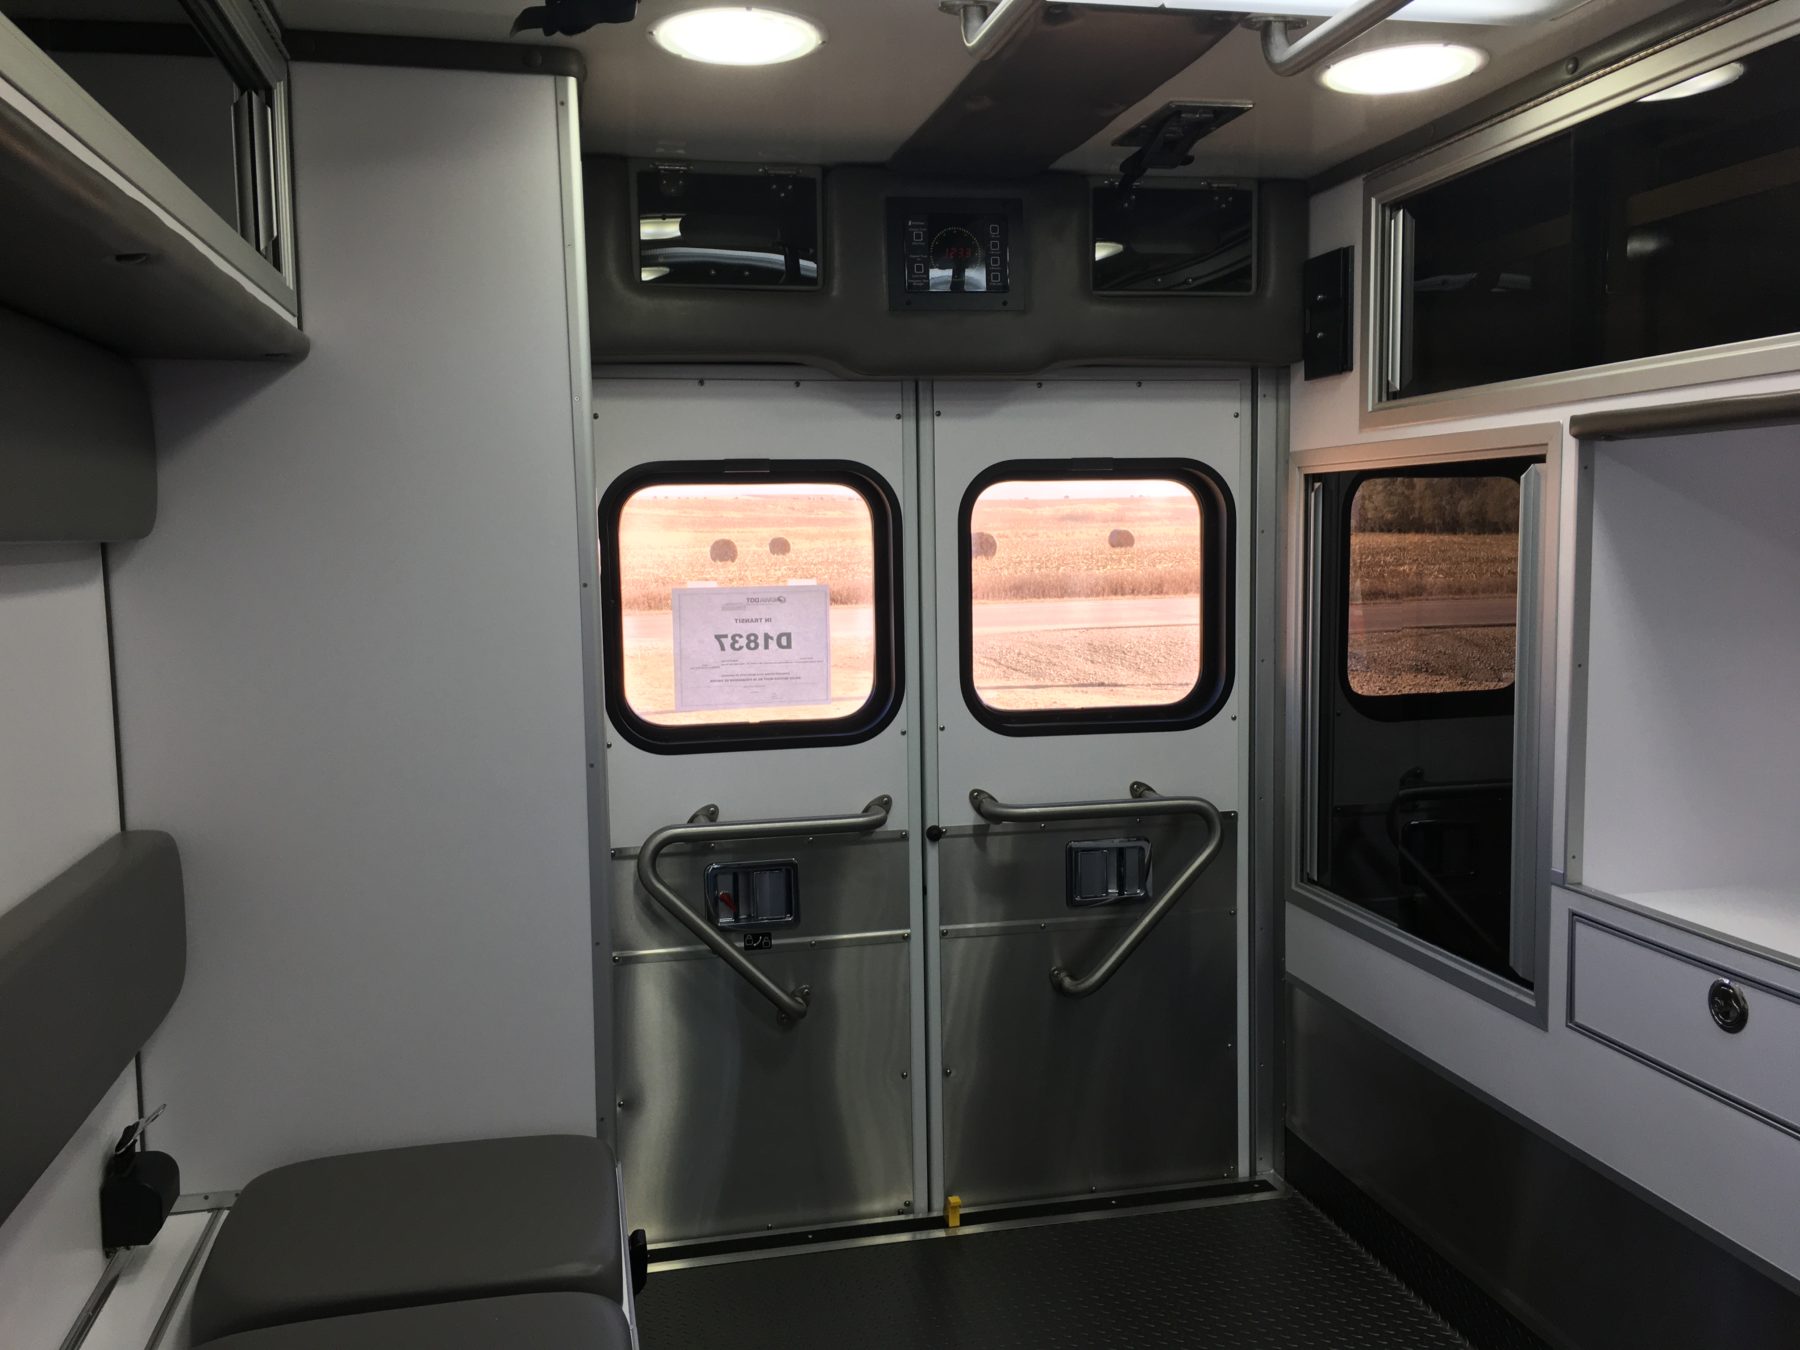 2020 Ram 4500 4x4 Heavy Duty Ambulance For Sale – Picture 8